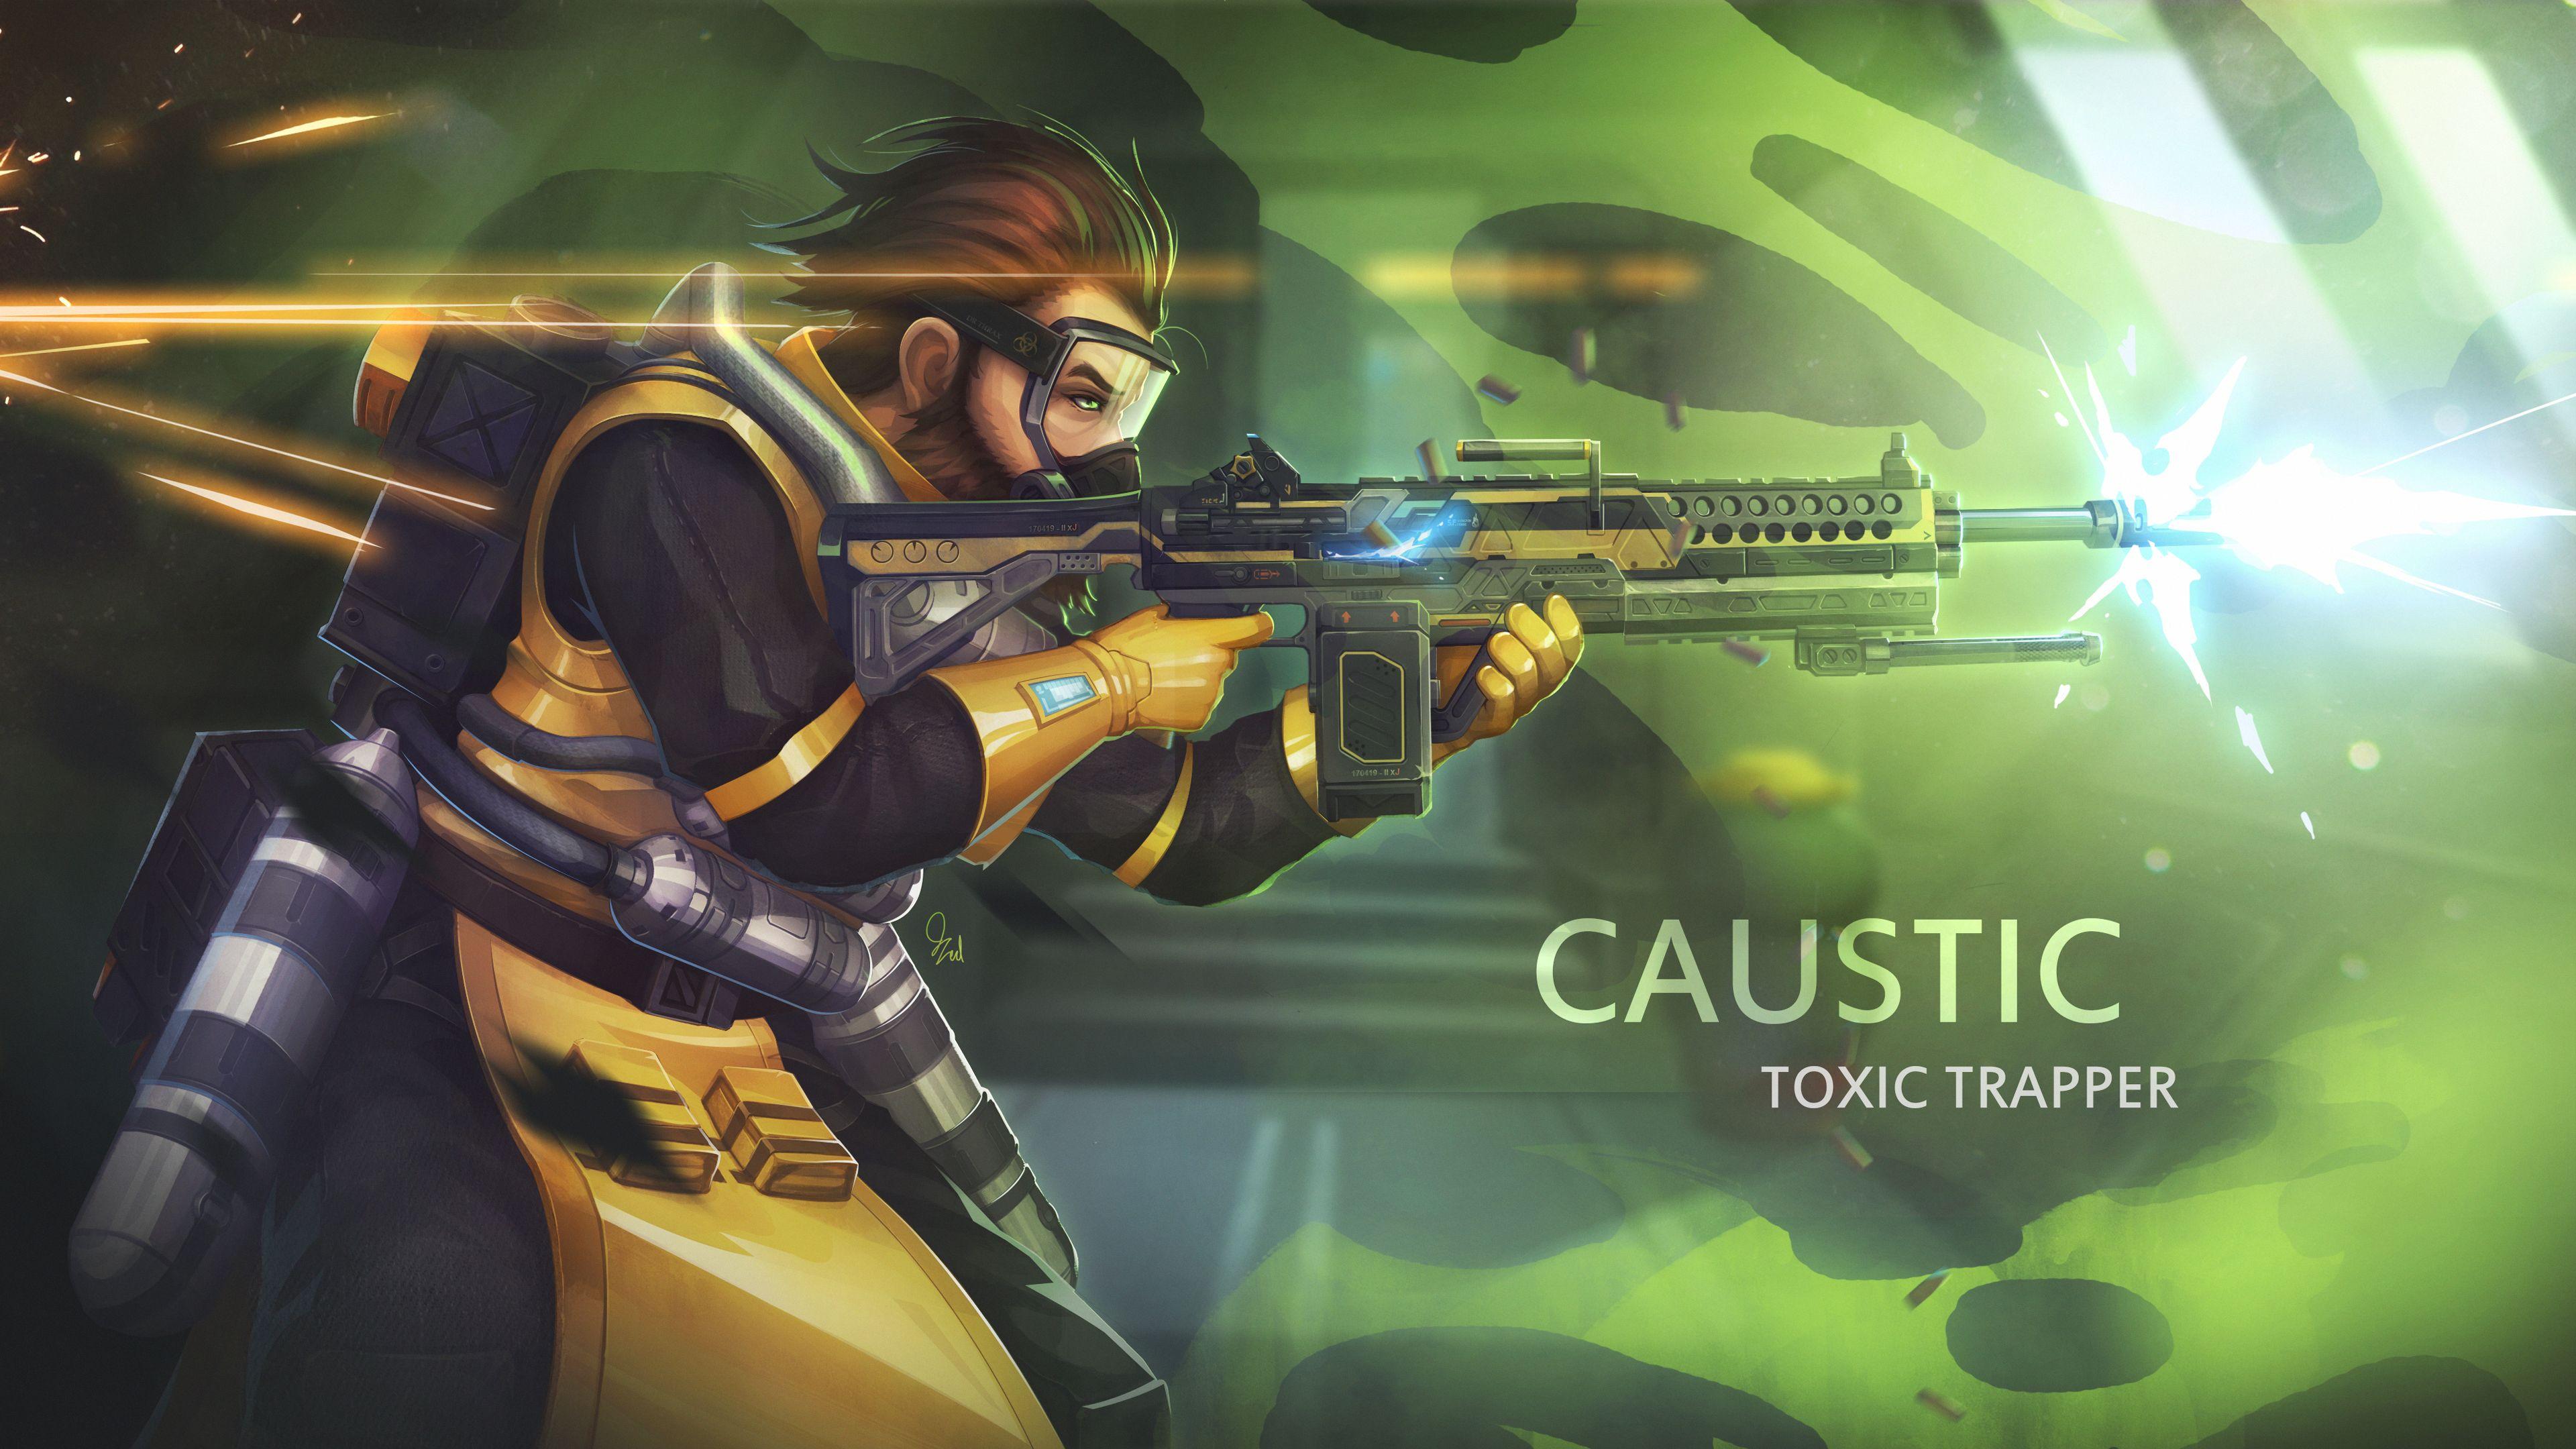 Caustic 4K Backgrounds Apex FanArt by Qassamzed Wallpapers and.